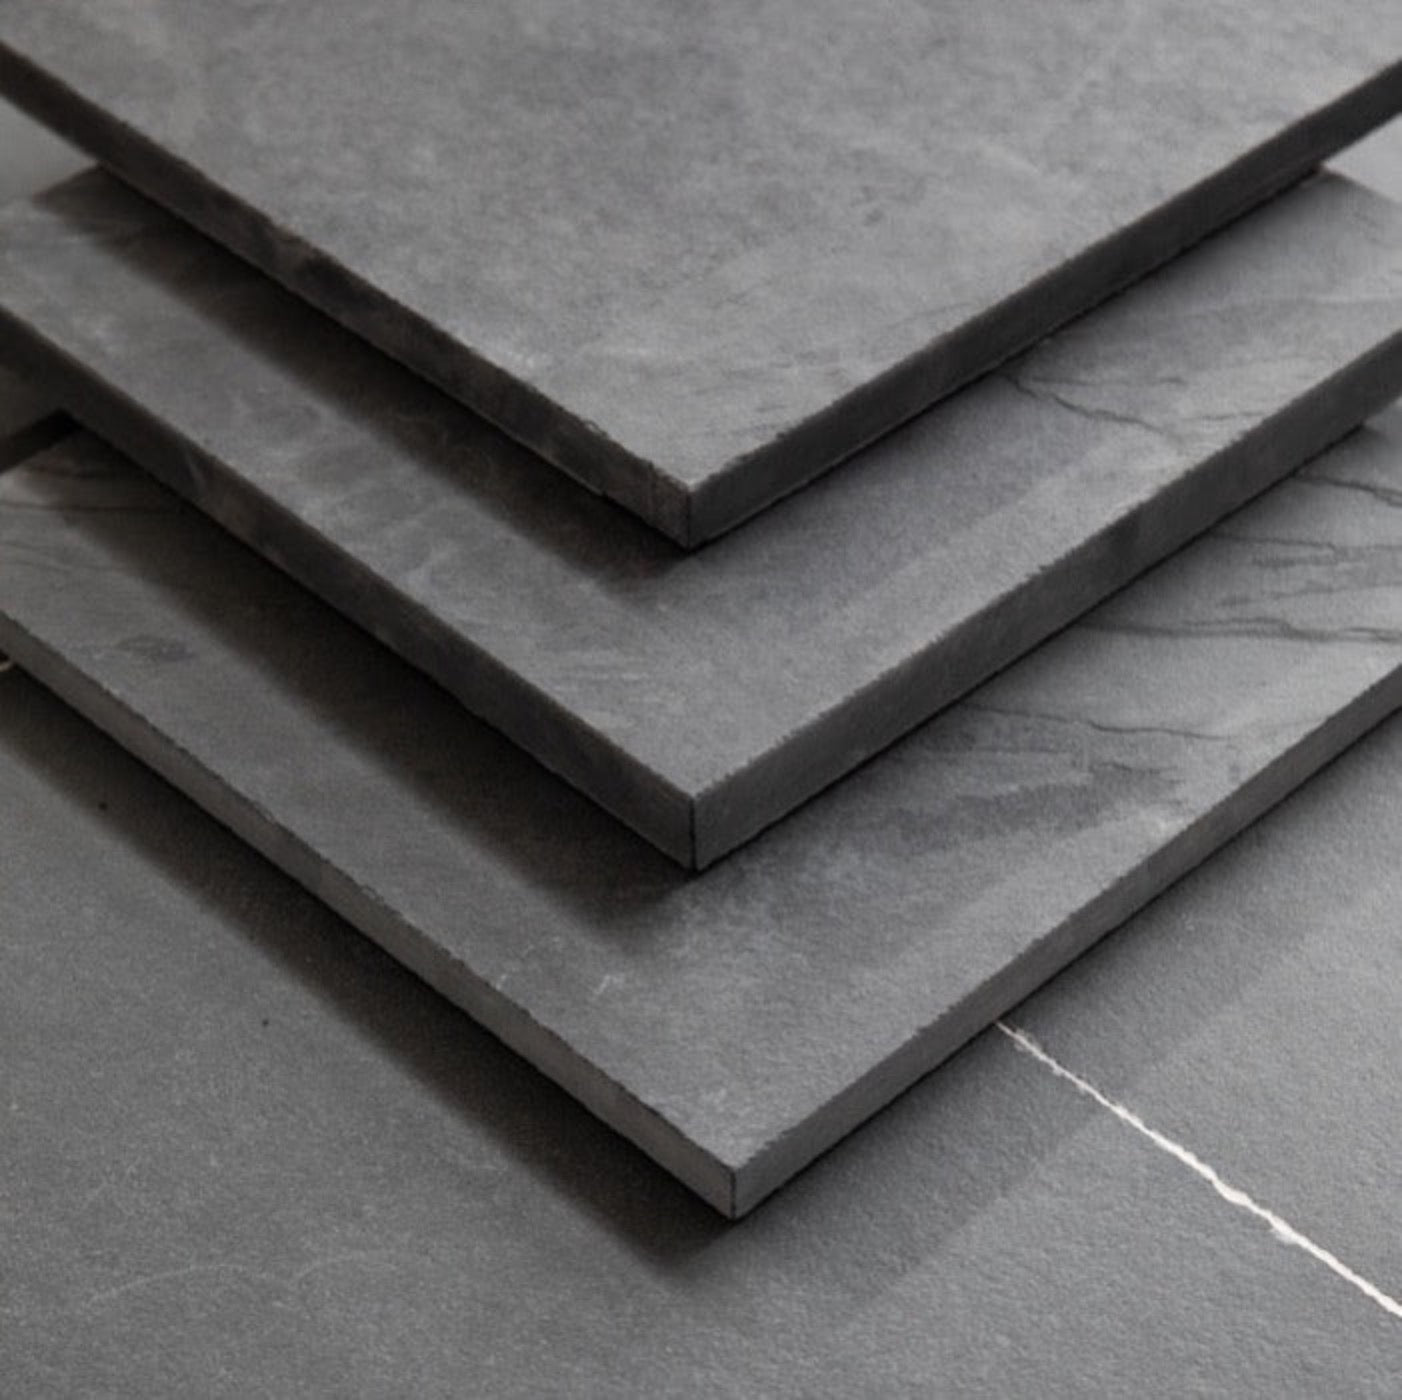 Black Slate Paving Patio Coping & Pond Slabs 800 x 250 x 20 mm | As low as £32.81/m2  | Delivered